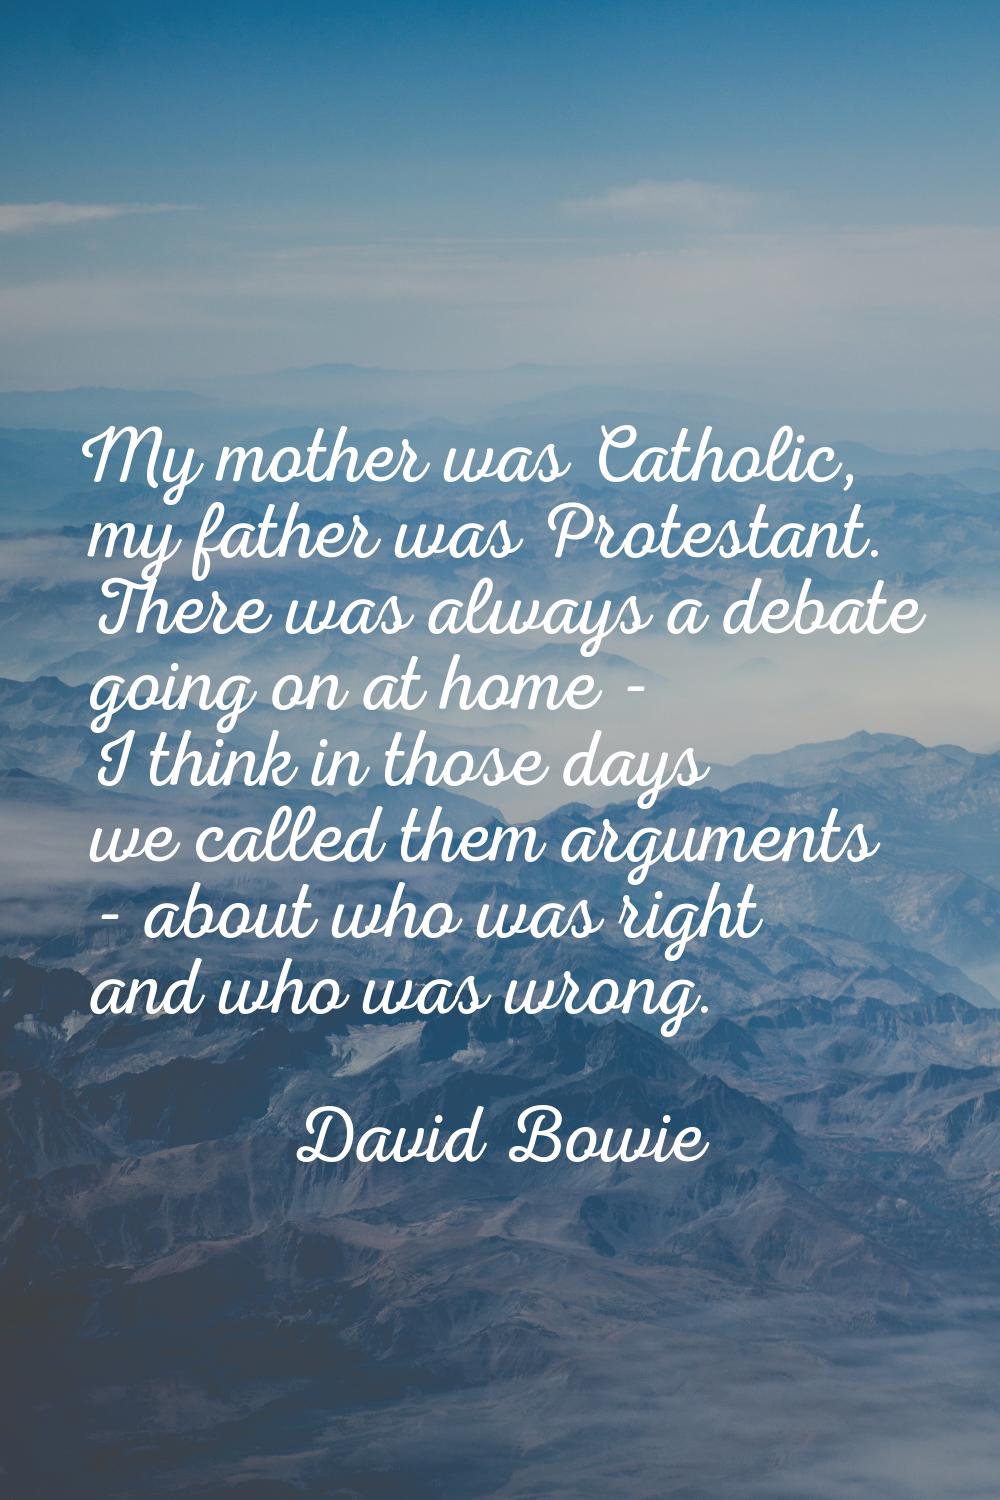 My mother was Catholic, my father was Protestant. There was always a debate going on at home - I th